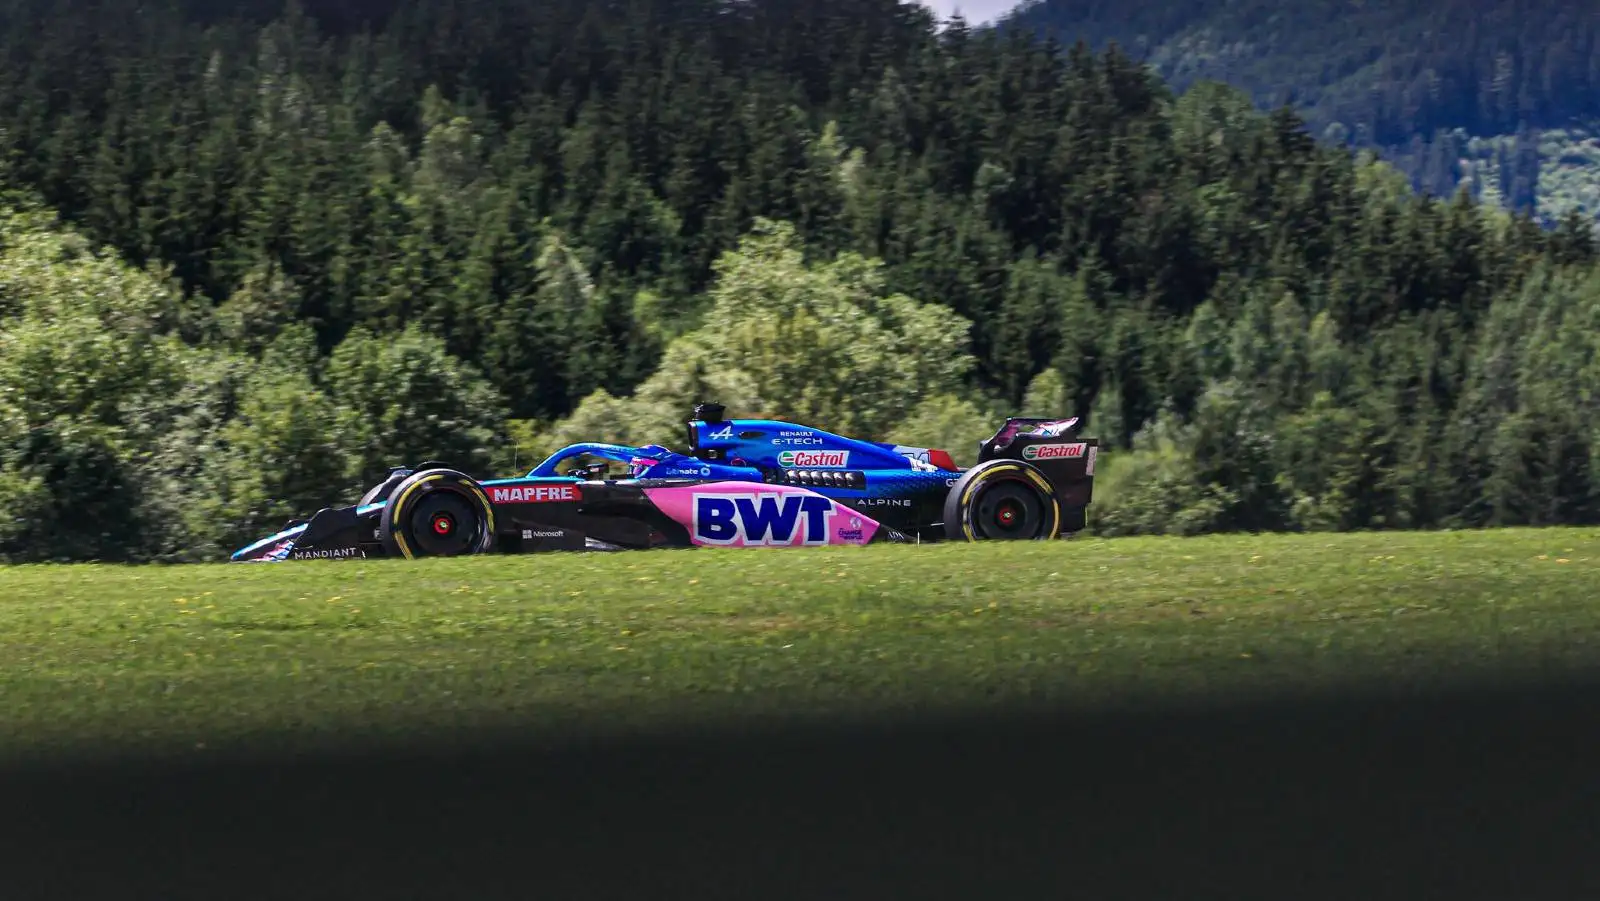 Fernando Alonso's Alpine at the Austrian GP. Red Bull Ring July 2022.